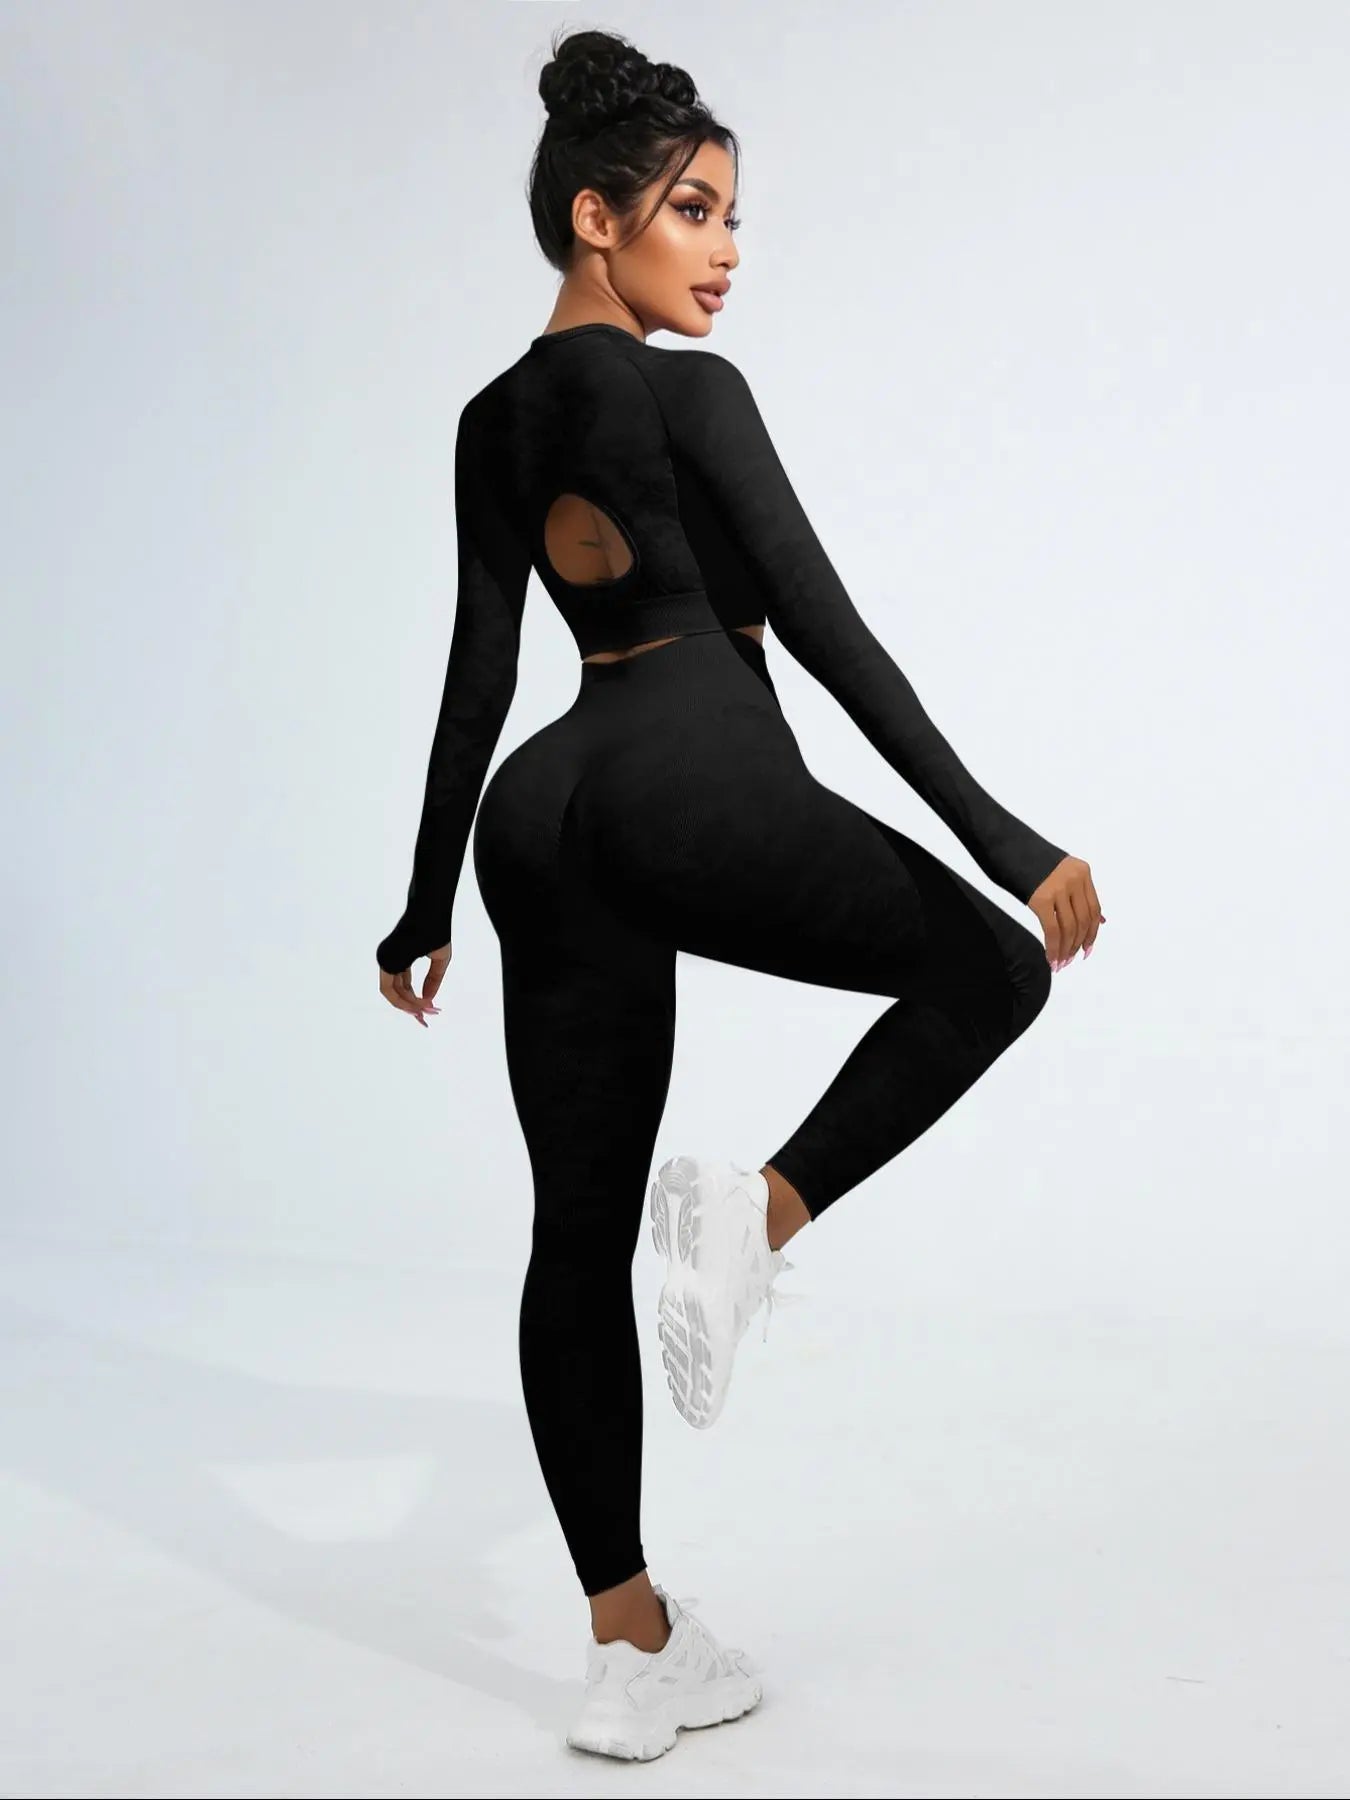 Women'S Long Sleeve Cut Out Crop Top & Slim-Fitting Hip Lifting High Waist Leggings Set for Spring, Comfort Athletic Gymwear, round Neck Cropped Top & Ruched Leggings Outfits Active Set, Minimalist Basic Womenswear, Comfy Ladies Outfits